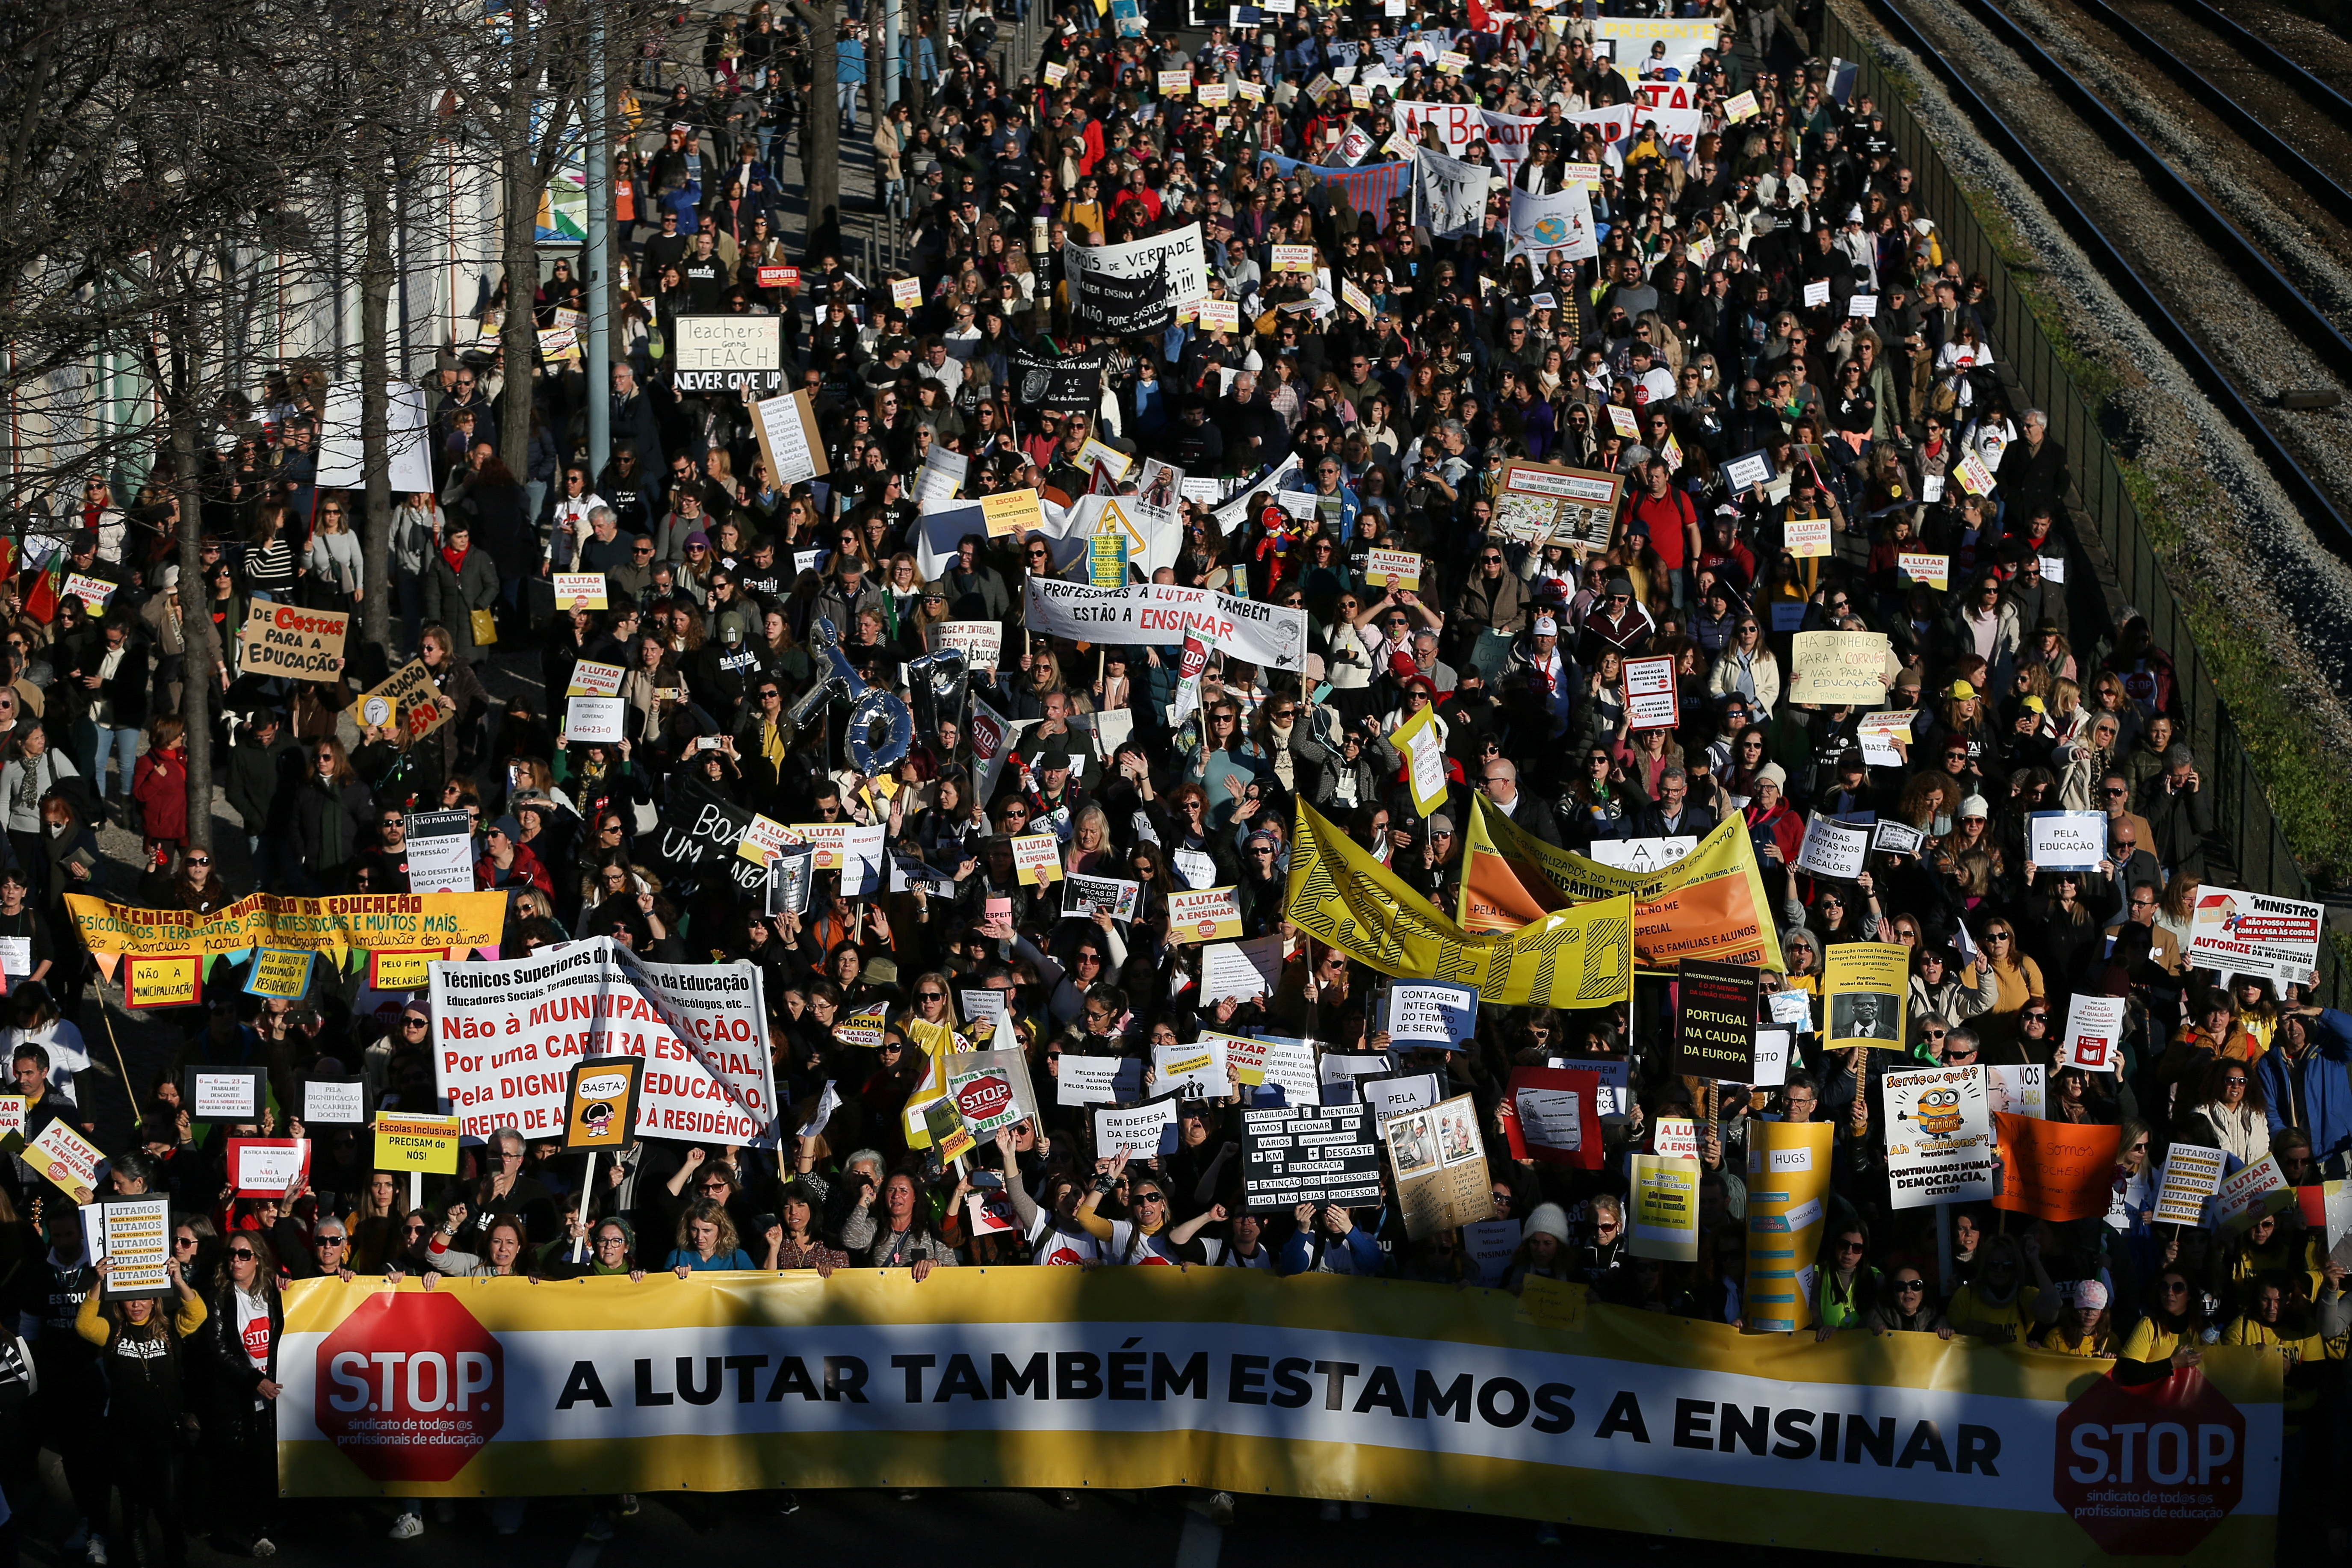 School workers demonstrate for better salaries and working conditions in Lisbon